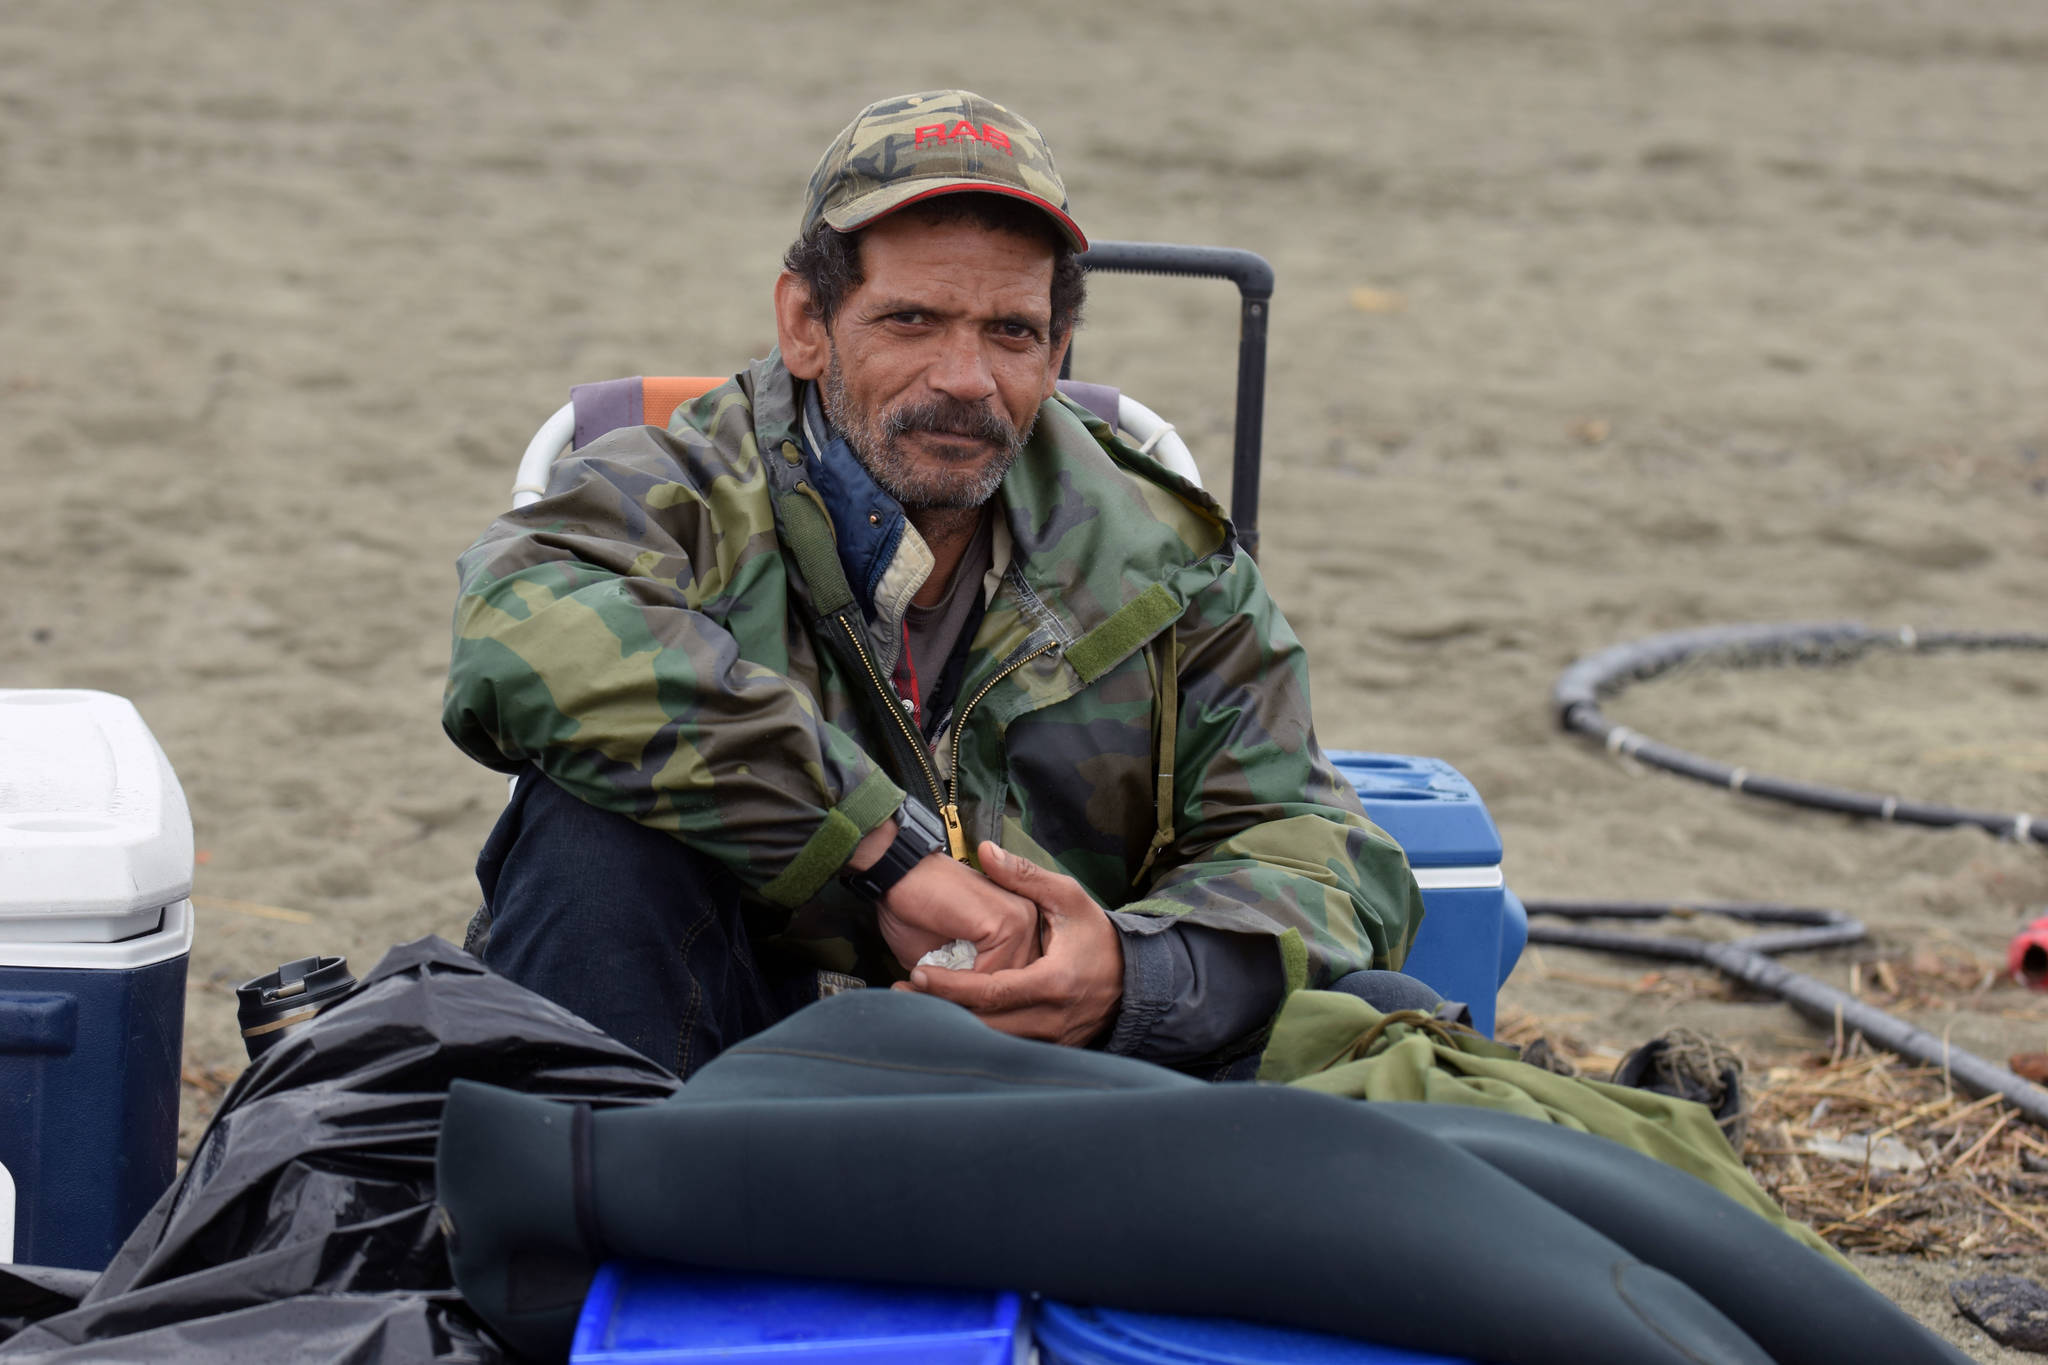 Anchorage resident Mike Wolford rests on Kenai Beach Tuesday, June 10, 2018, during the first day of dipnetting season in Kenai, Alaska. Wolford, who traveled with a friend to join in the dipnetters, had caught on salmon by mid-afternoon. (Photo by Erin Thompson/Peninsula Clarion)